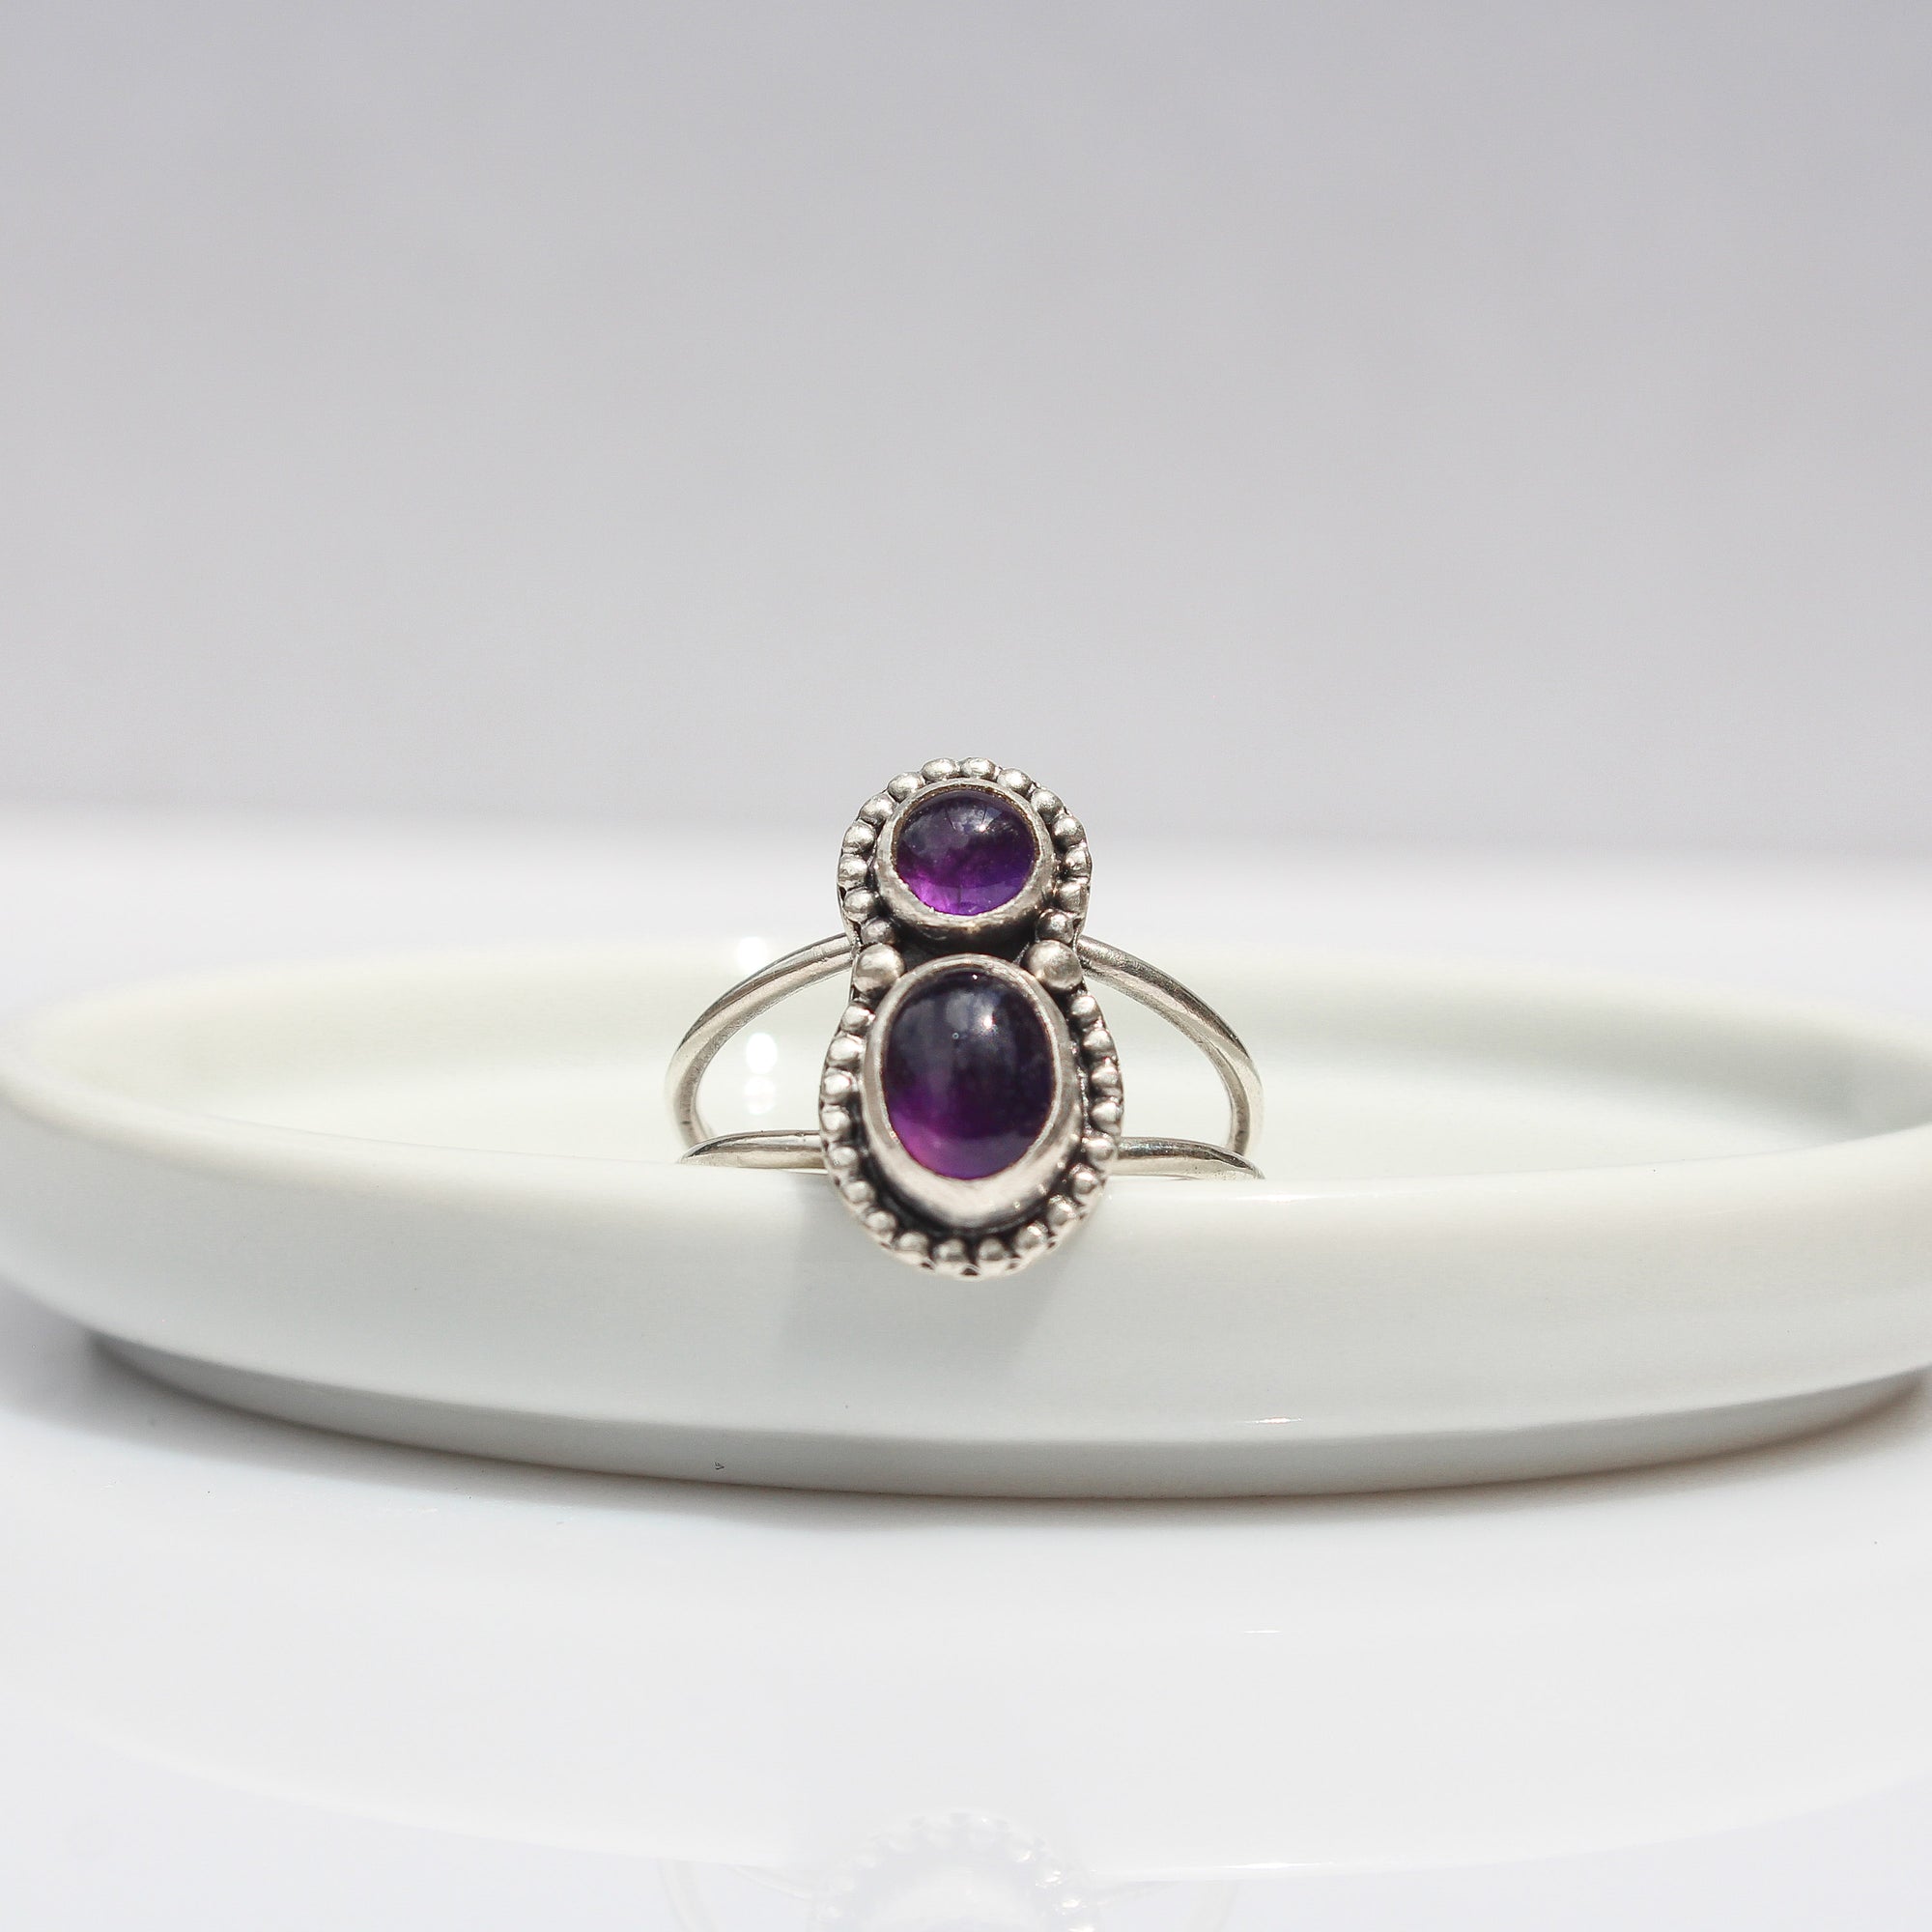 Double Amethyst Ring - Size 7